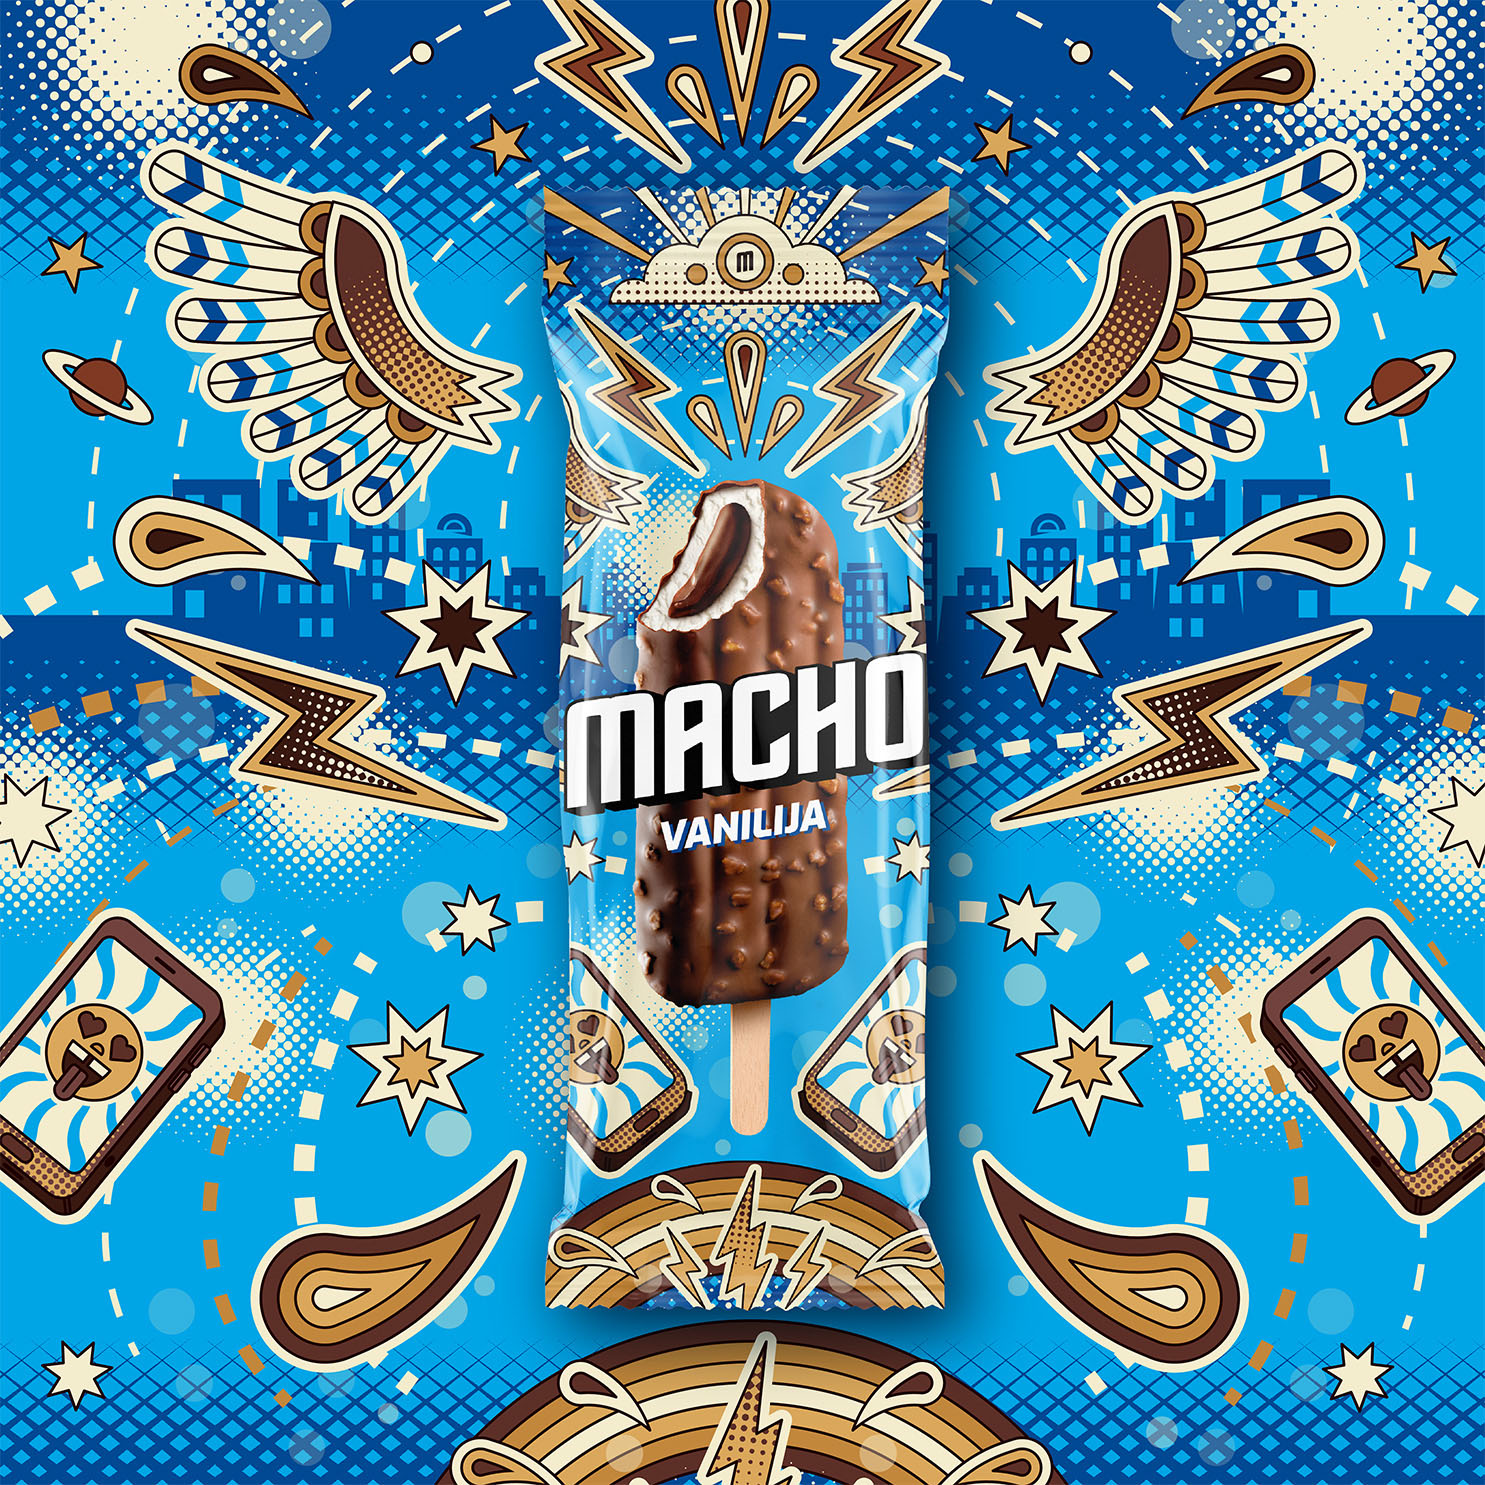 Ledo Macho Ice Cream Packaging Redesign Created by Spellcaster